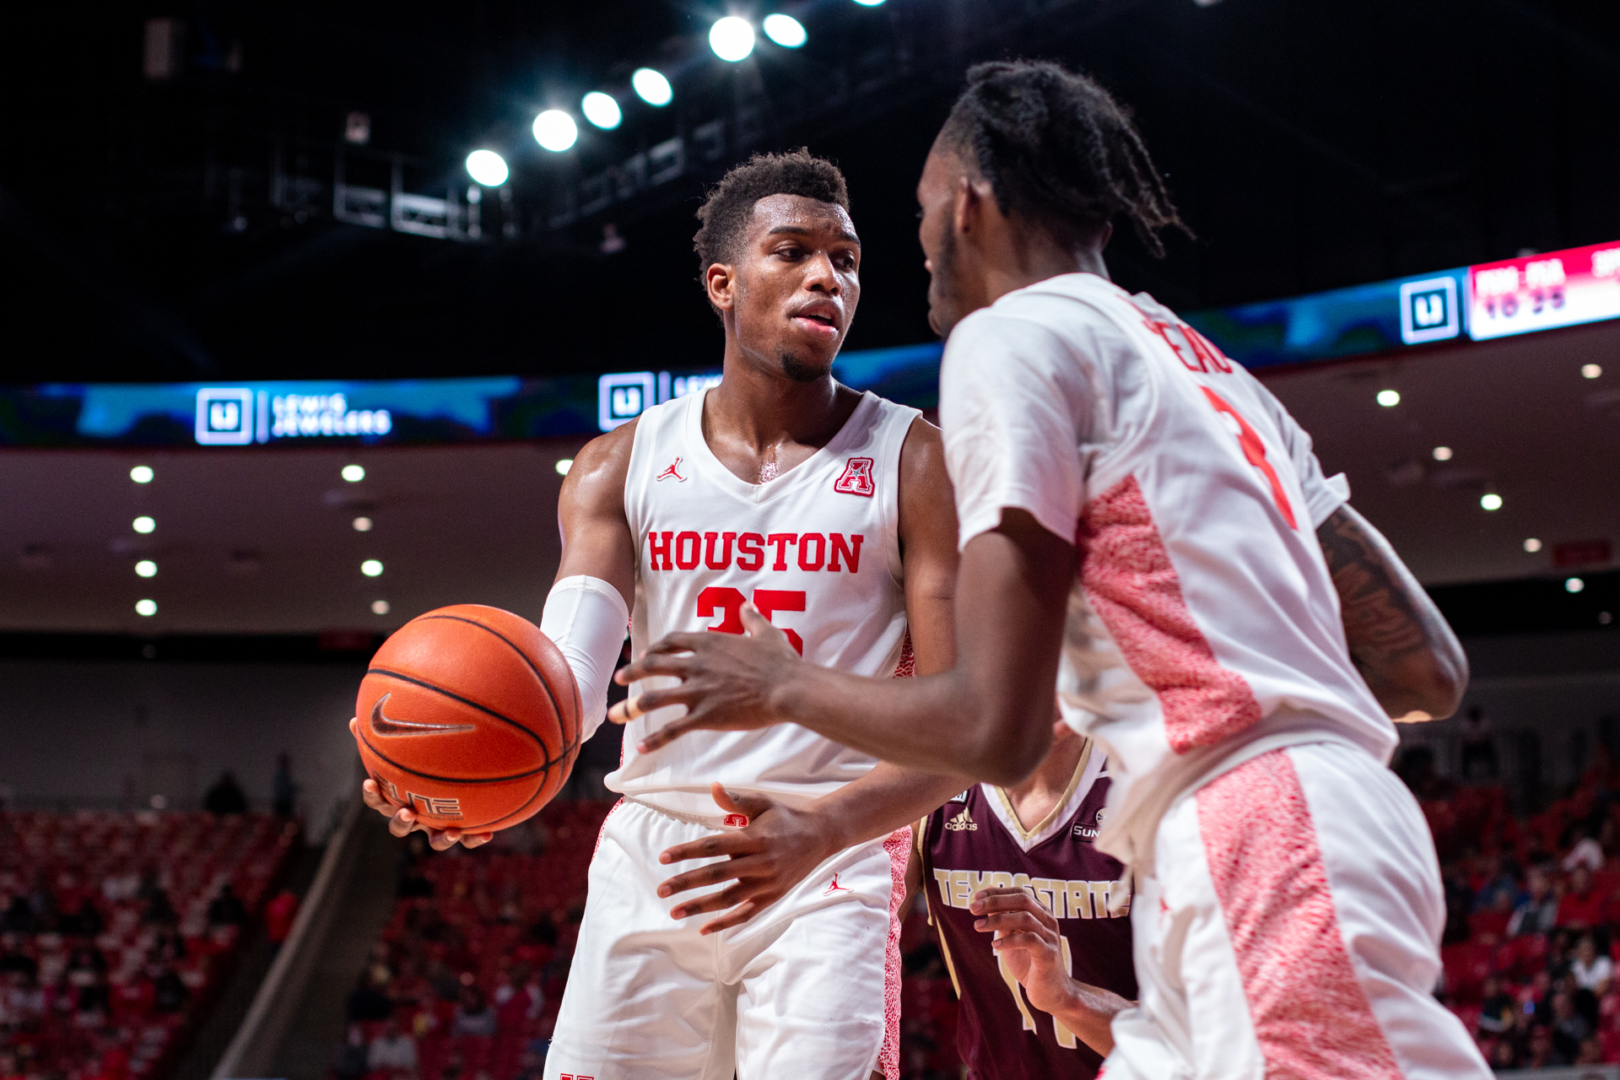 Junior forward Fabian White Jr. hands the ball off to DeJon Jarreau. Both players have been starters in the wins against SMU and Wichita State, which helped moved Houston into the AP Top 25 | Kathryn Lenihan/ The Cougar